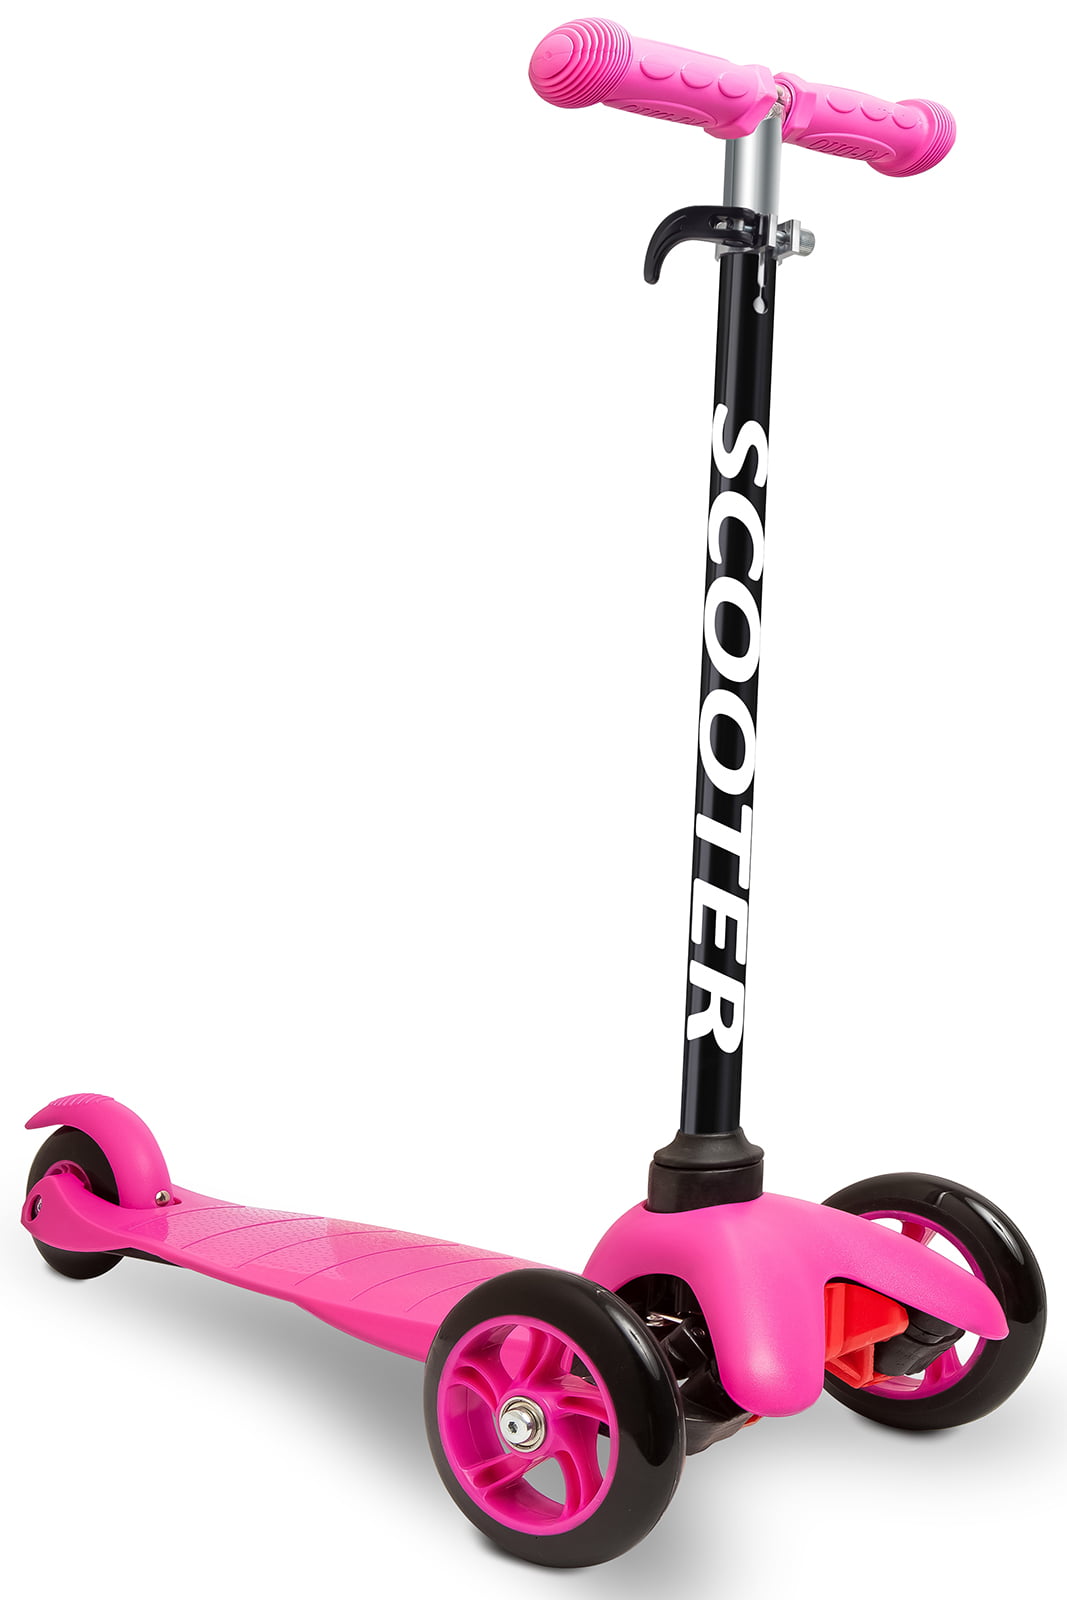 walmart toy scooters